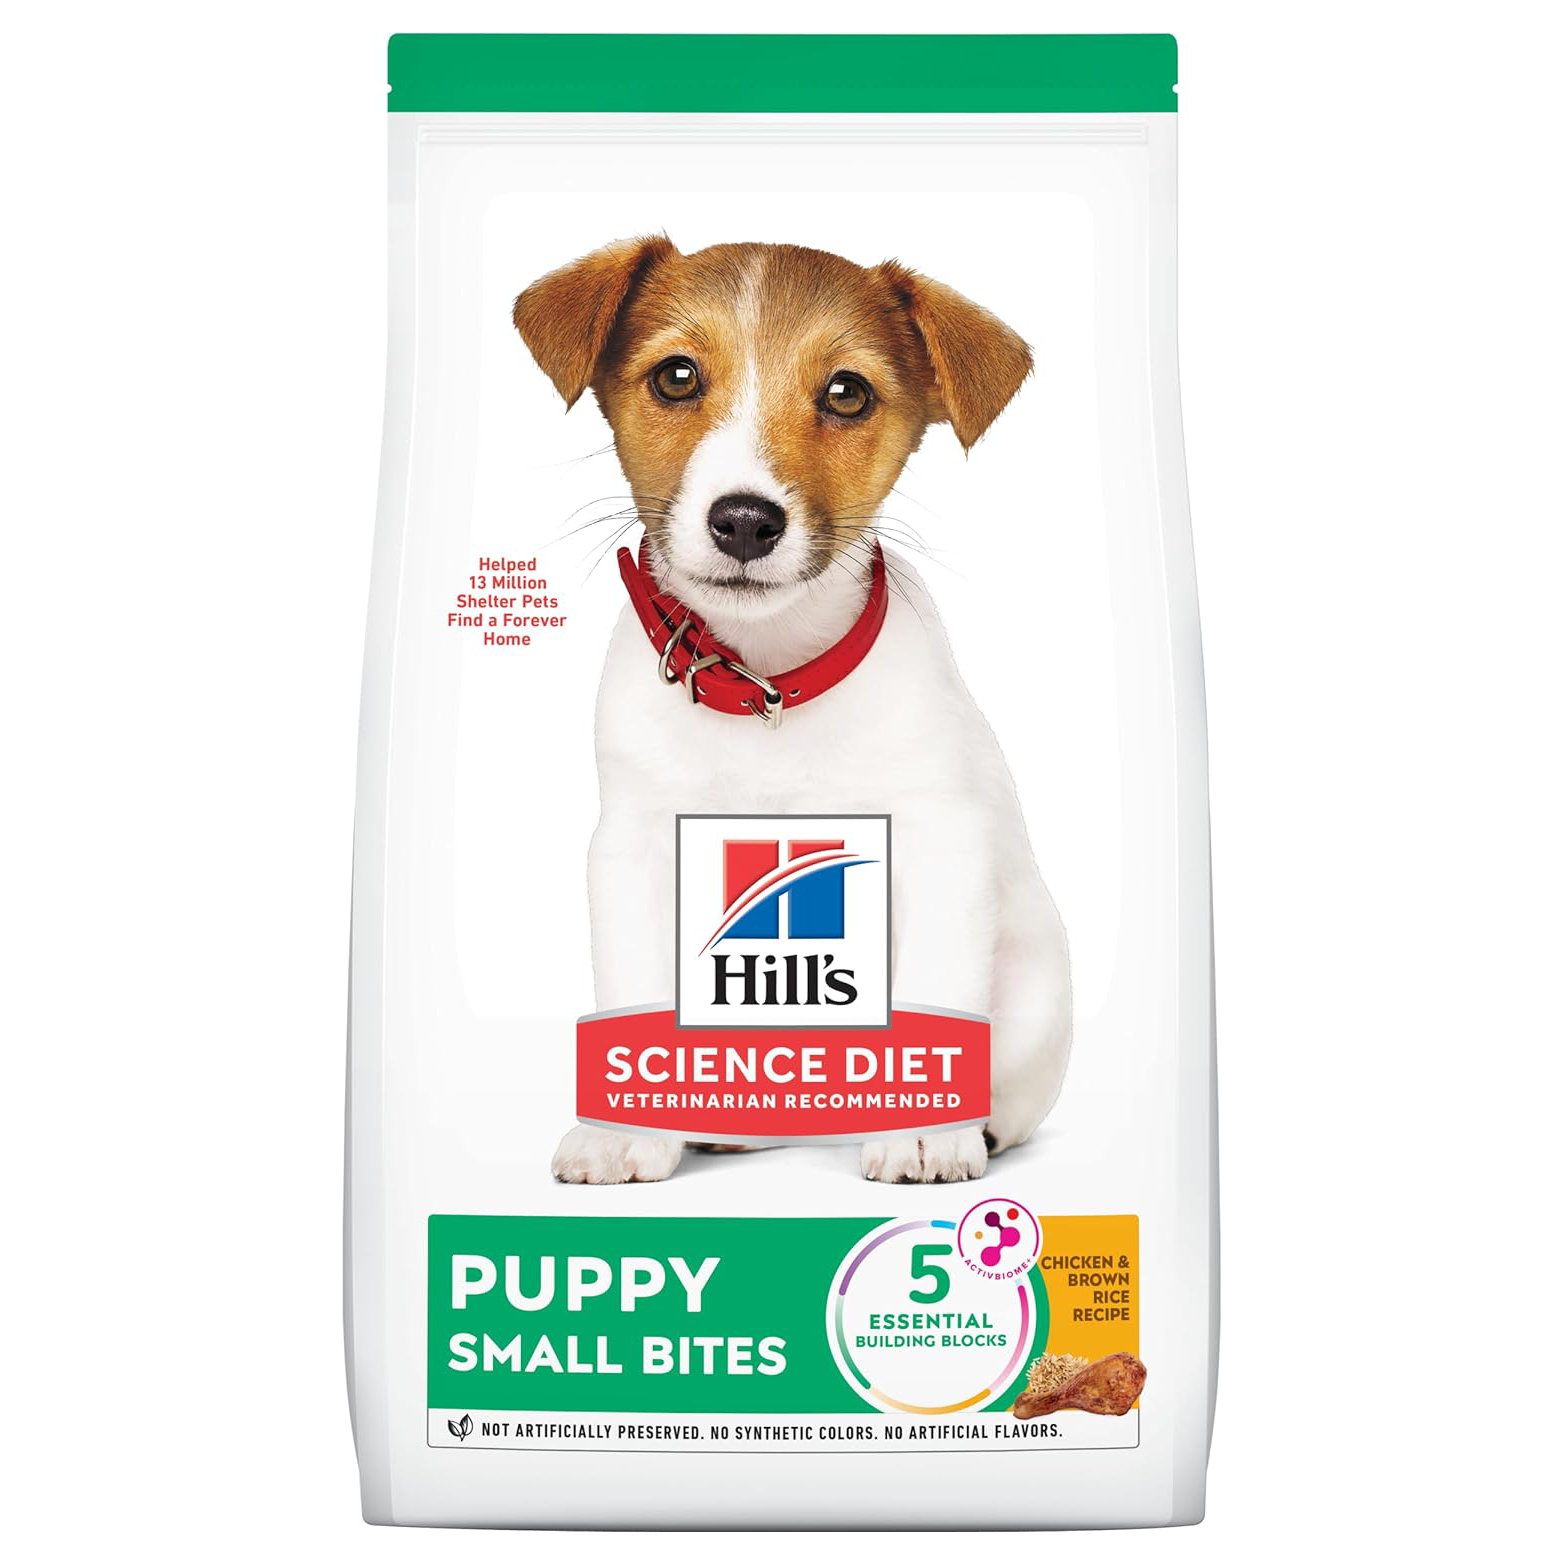 Hill’s Science Diet Puppy Healthy Development Small Bites Dry Dog Food